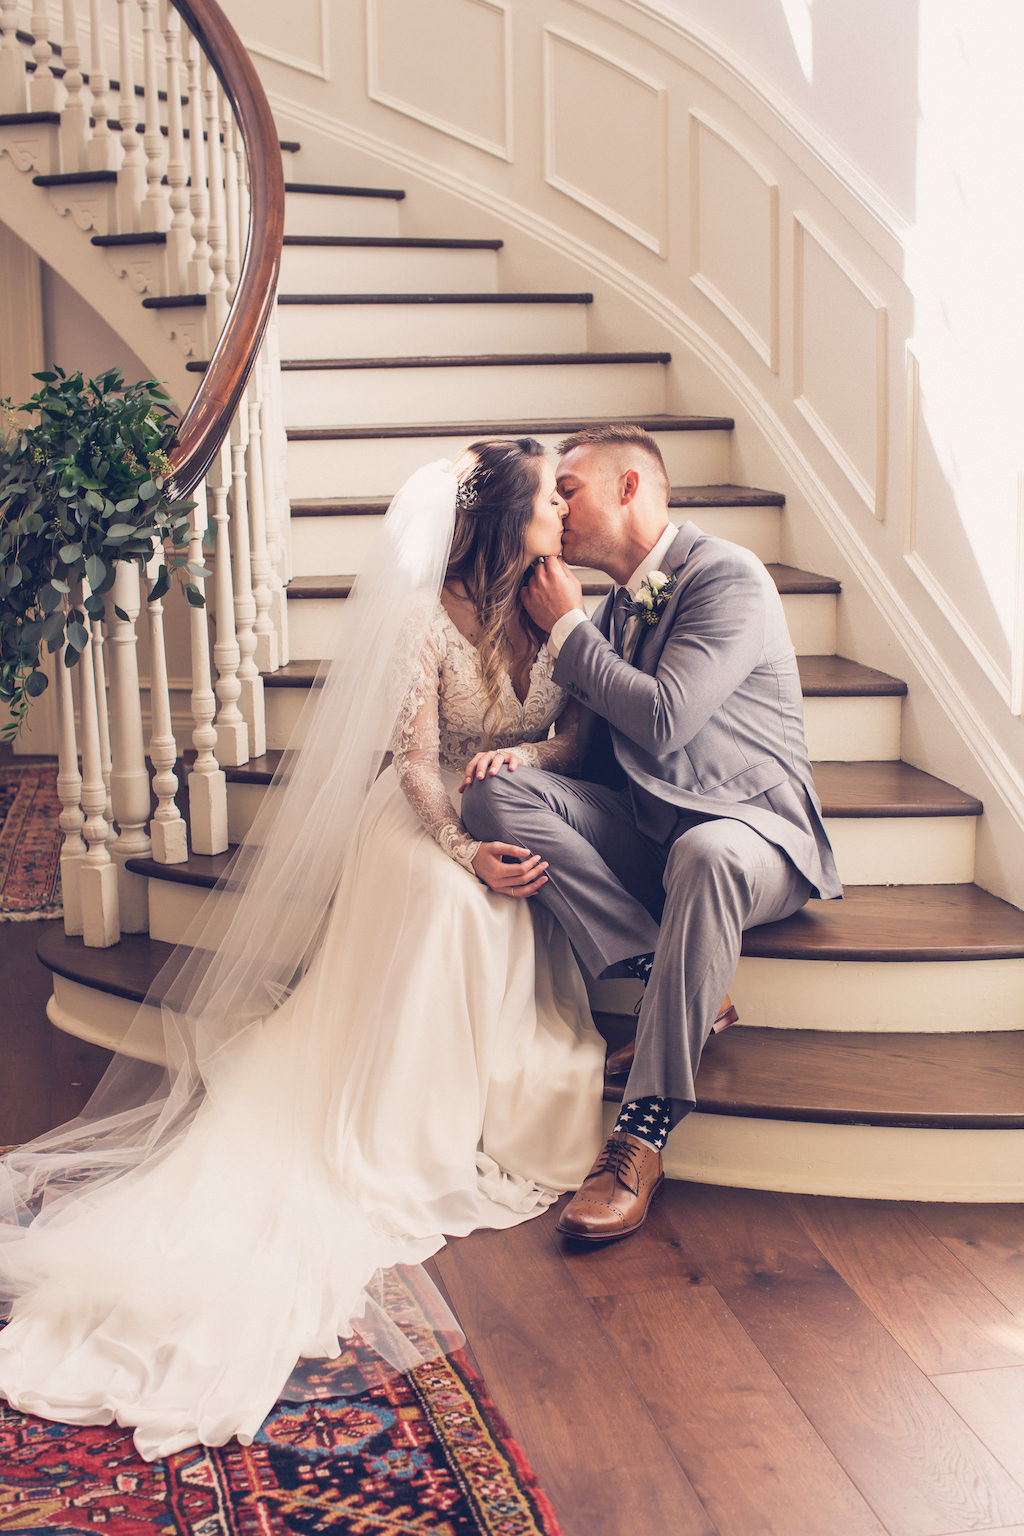 Simple Chic Romantic, South Tampa Bride and Groom Wedding Portrait on Staircase, Bride with Cathedral Length Veil | Wedding Venue Tampa Yacht Club | Florida Luxury Wedding Photographer Luxe Light Images